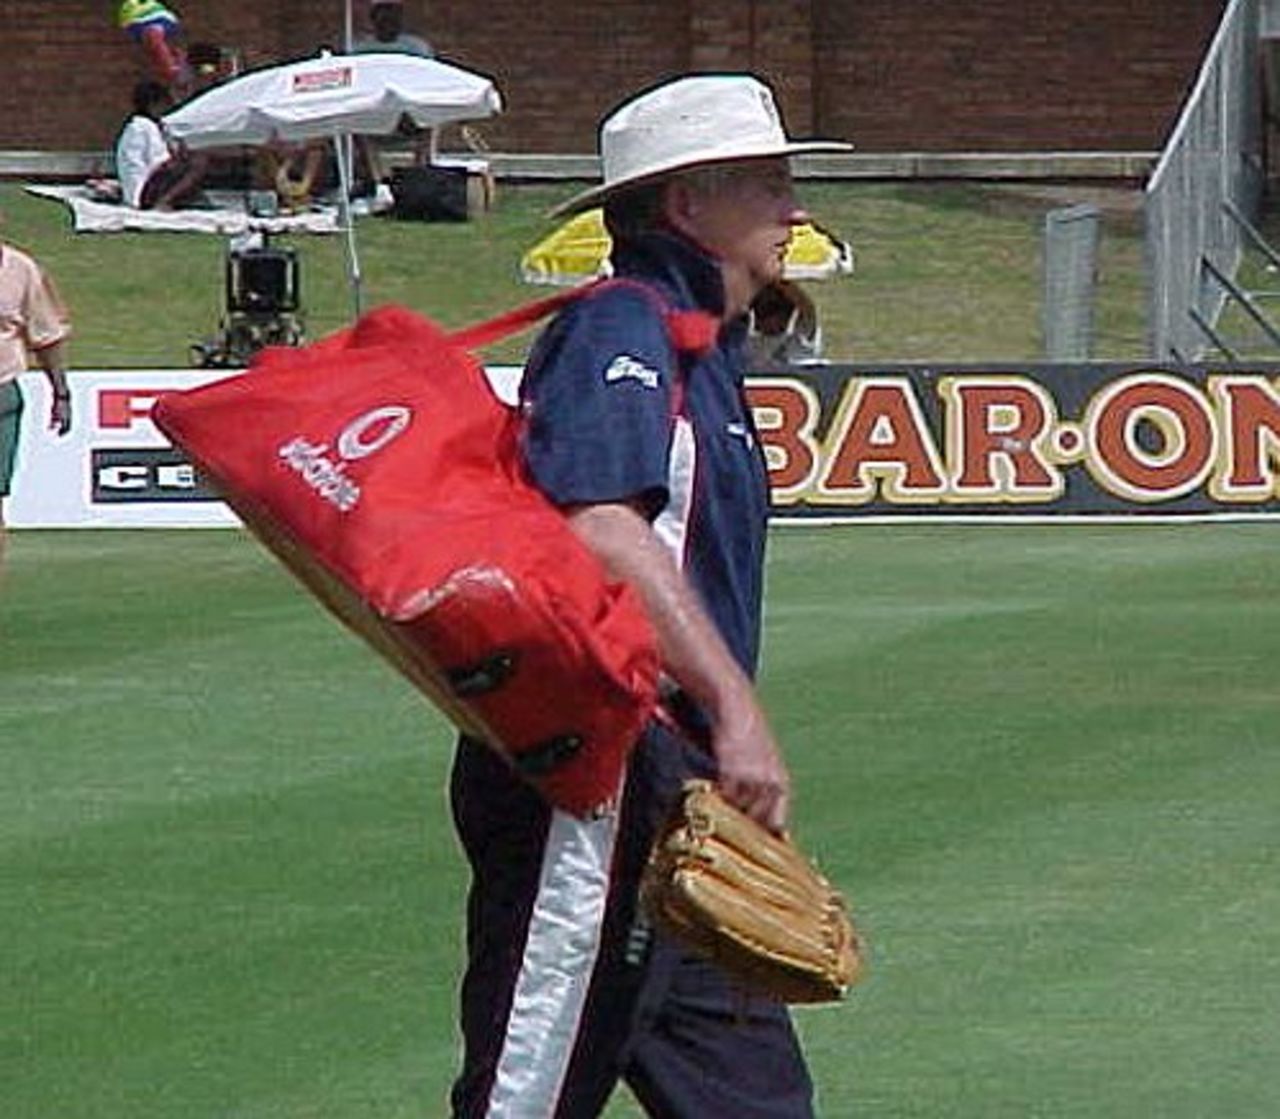 England coach Duncan Fletcher leads the practice session before play on day 3 of the second Test between England and South Africa in Port Elizabeth. (11 December 1999)